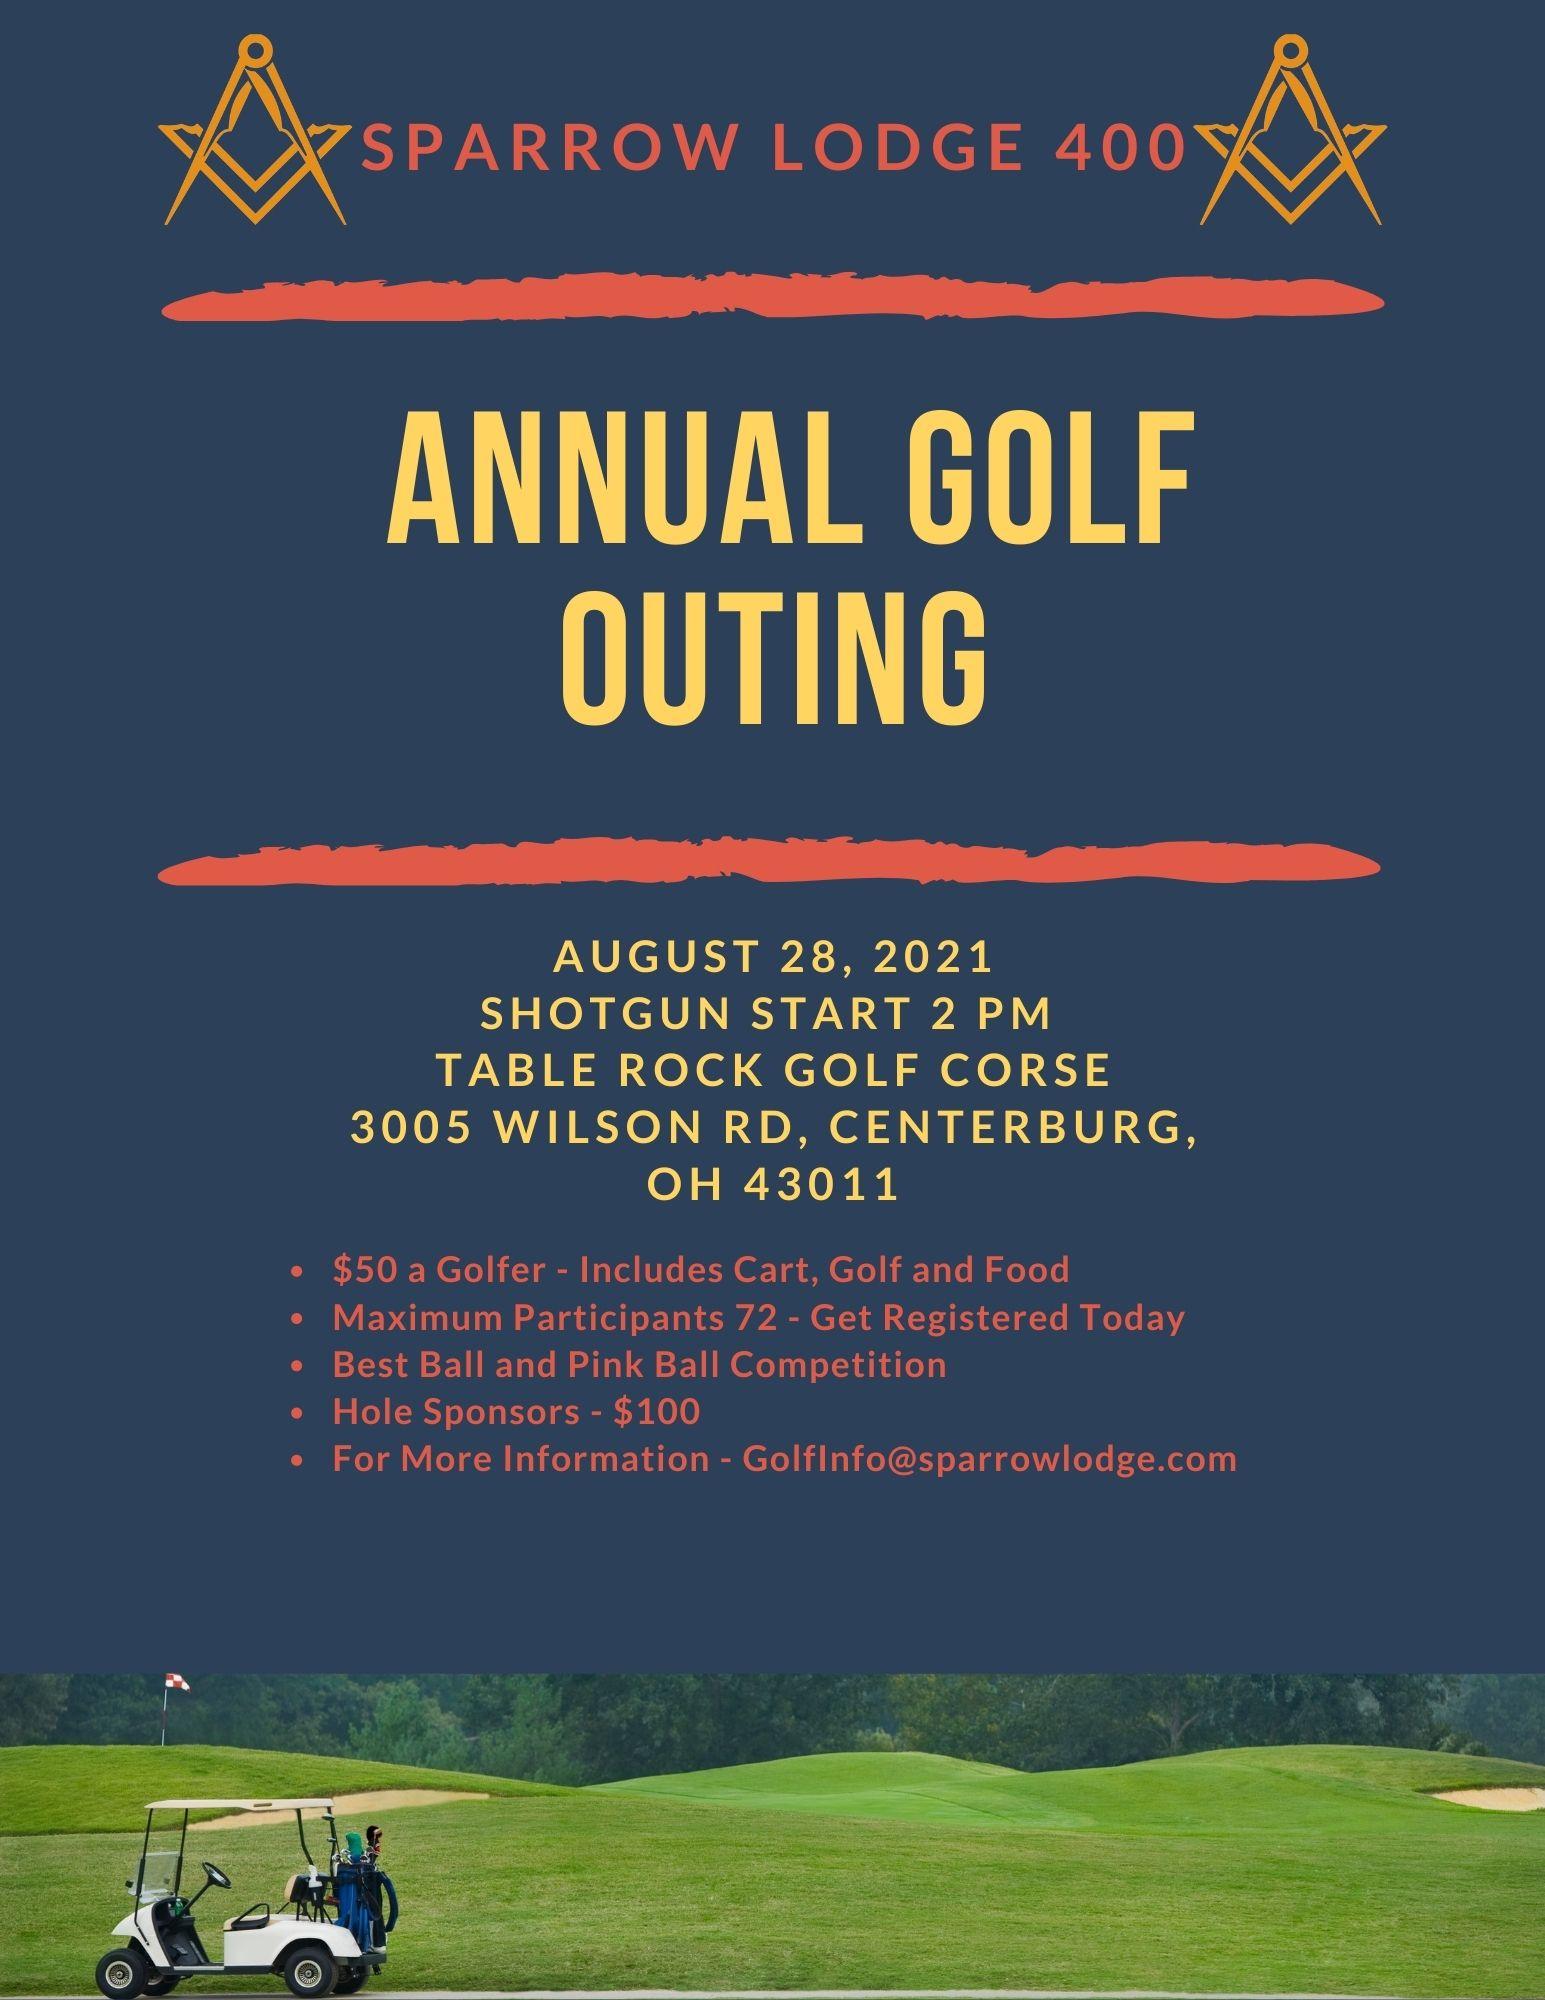 Sparrow Lodge 400 Golf Outing